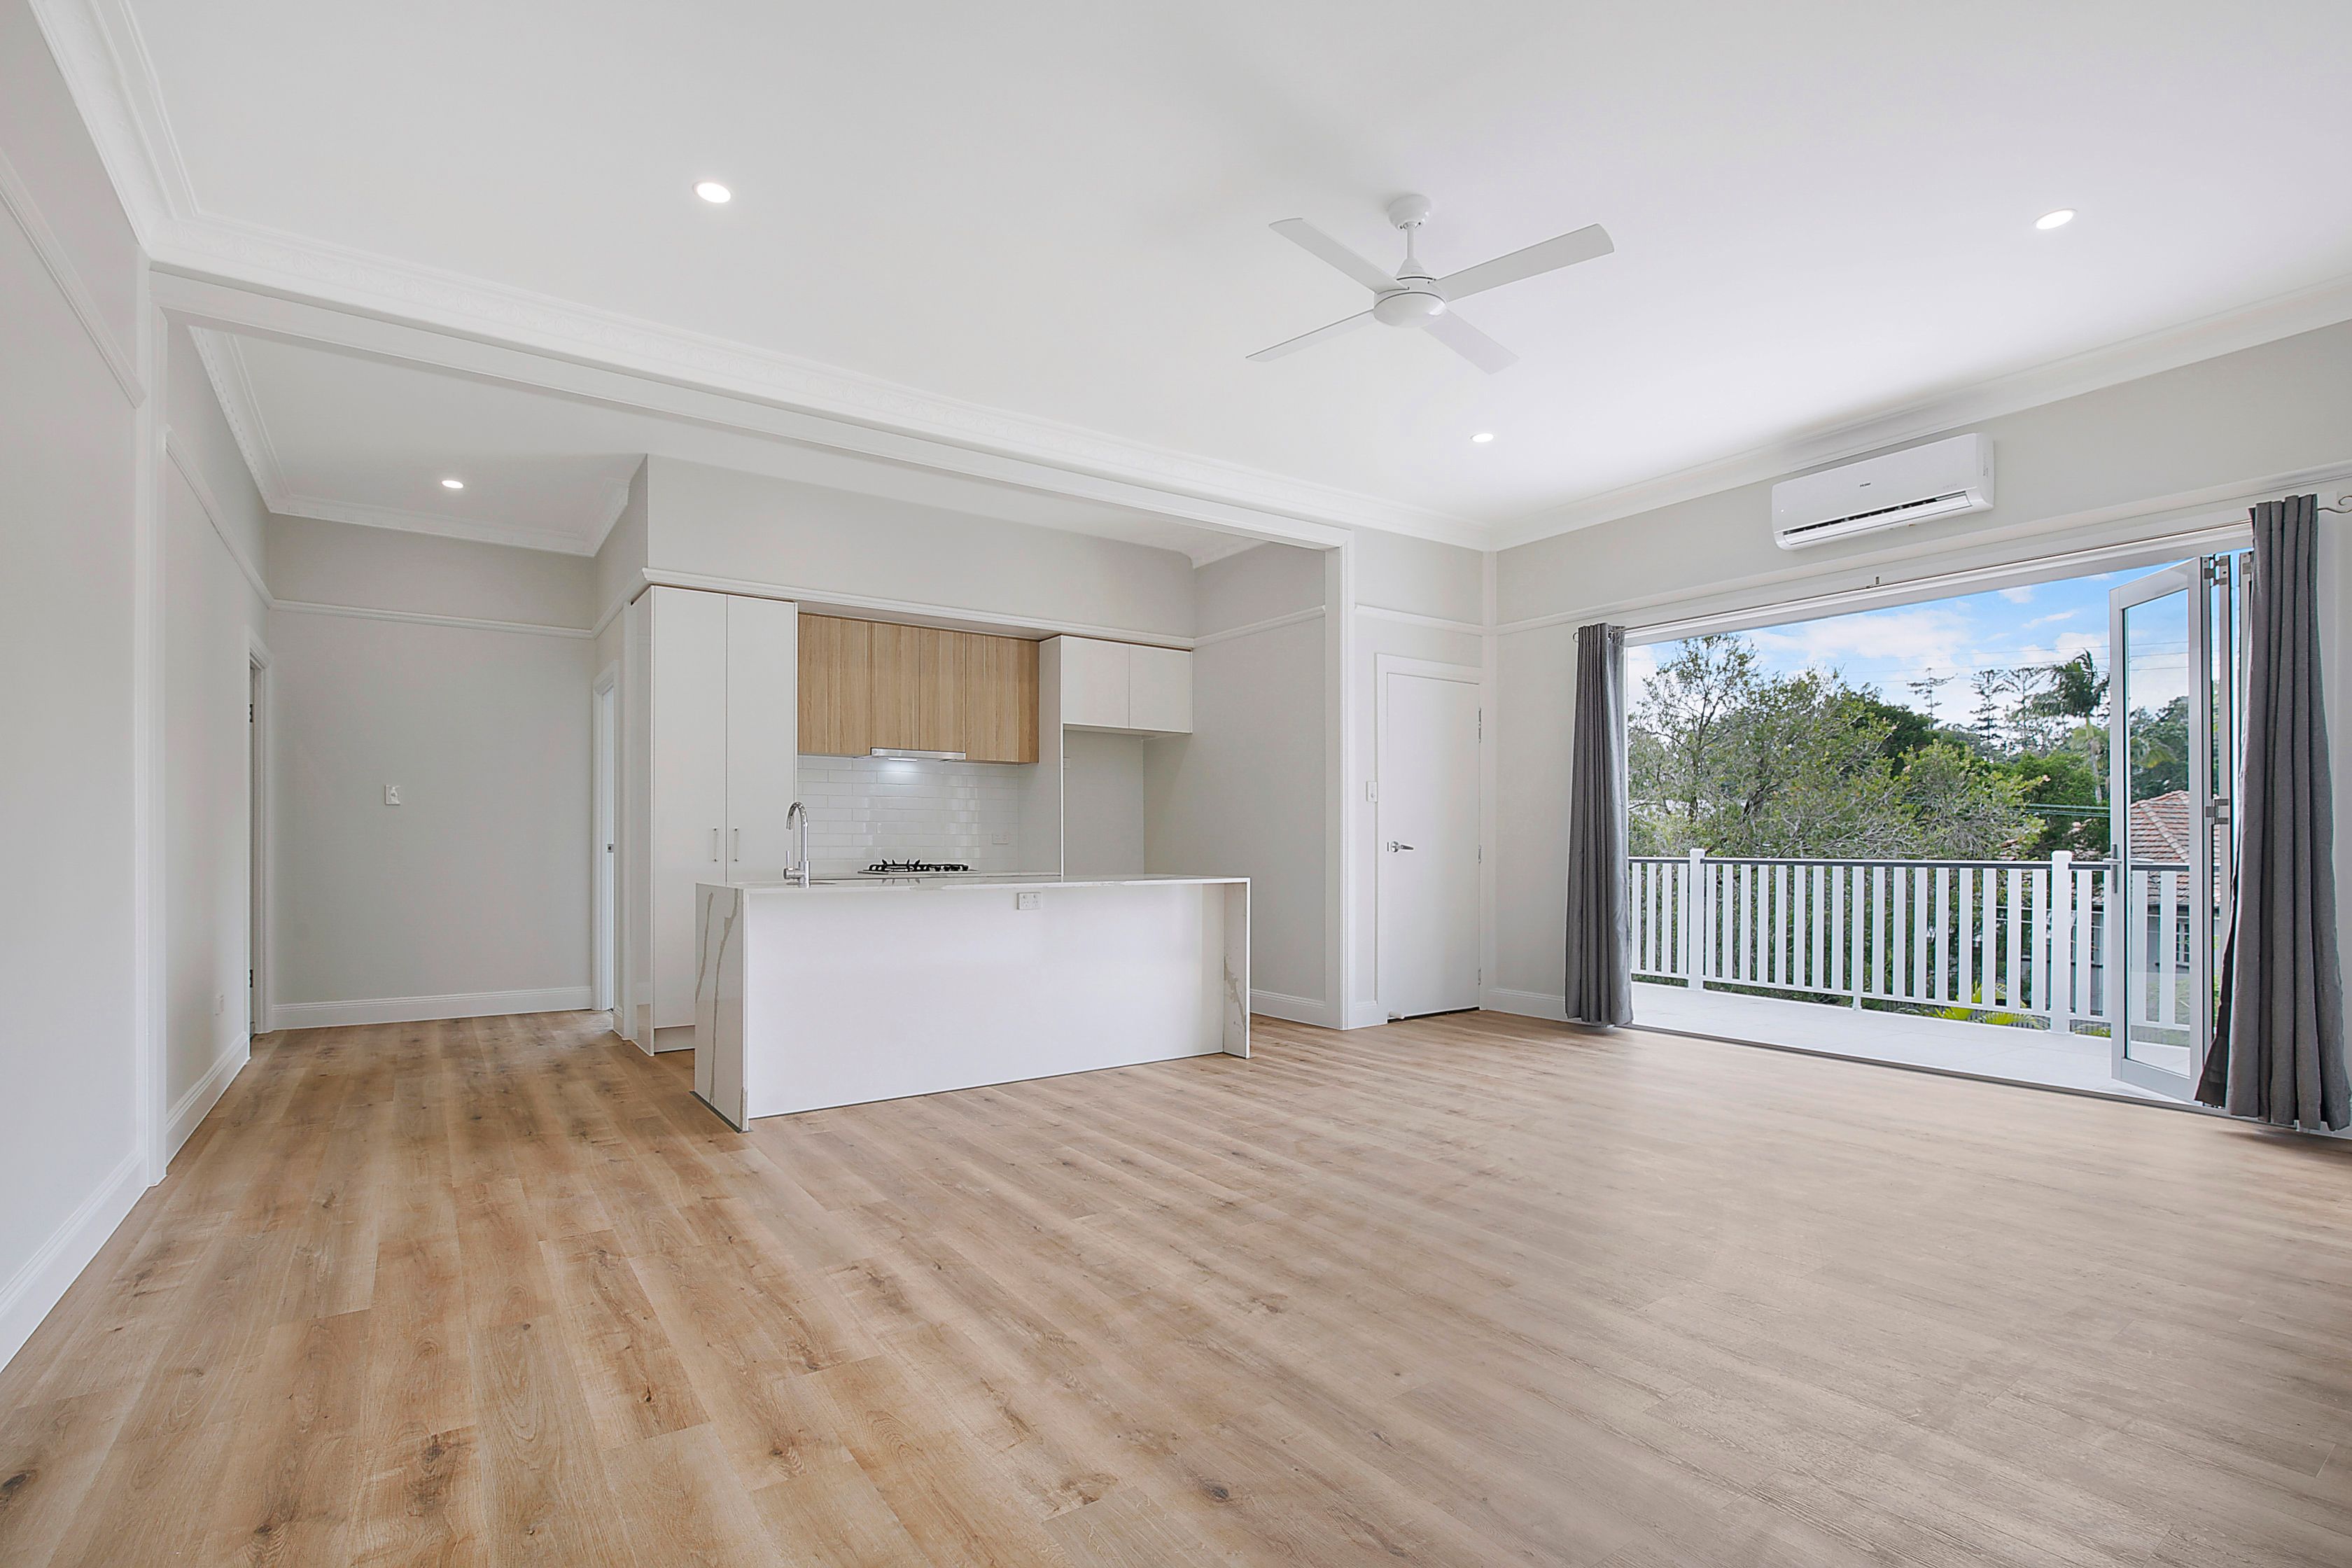 Leased Unit 1/2 Wight Street, Milton QLD 4064 - Jul 29, 2022 - Homely